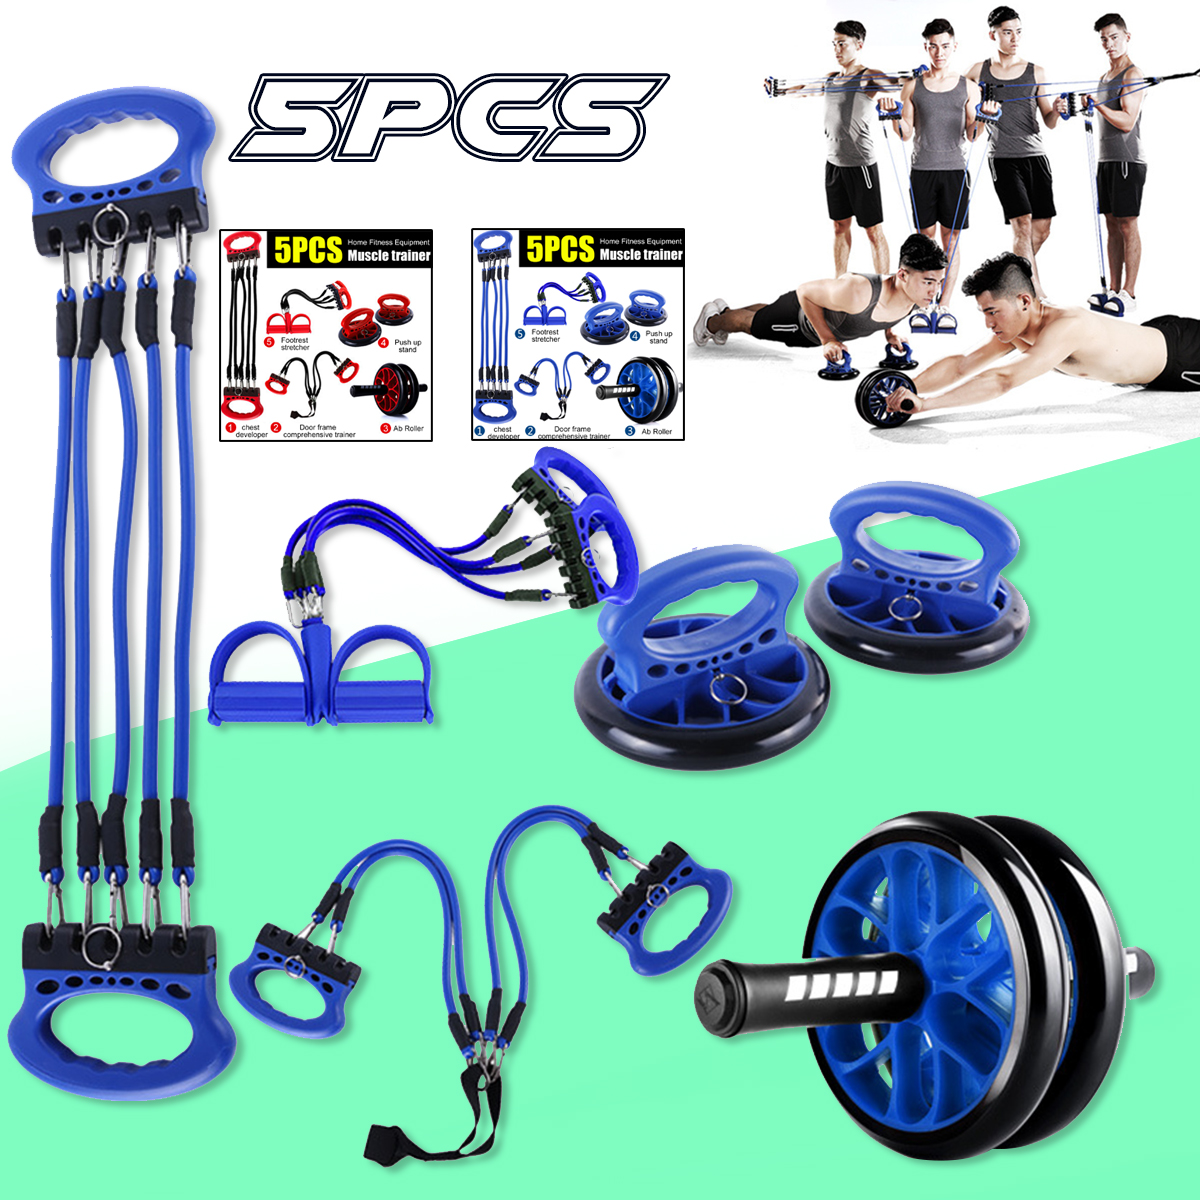 5PCS-Exercise-Tools-Abdominal-Wheel-Footrest-Stretcher-Chest-Push-ups-Stand-Body-Fitness-Trainer-1666422-1